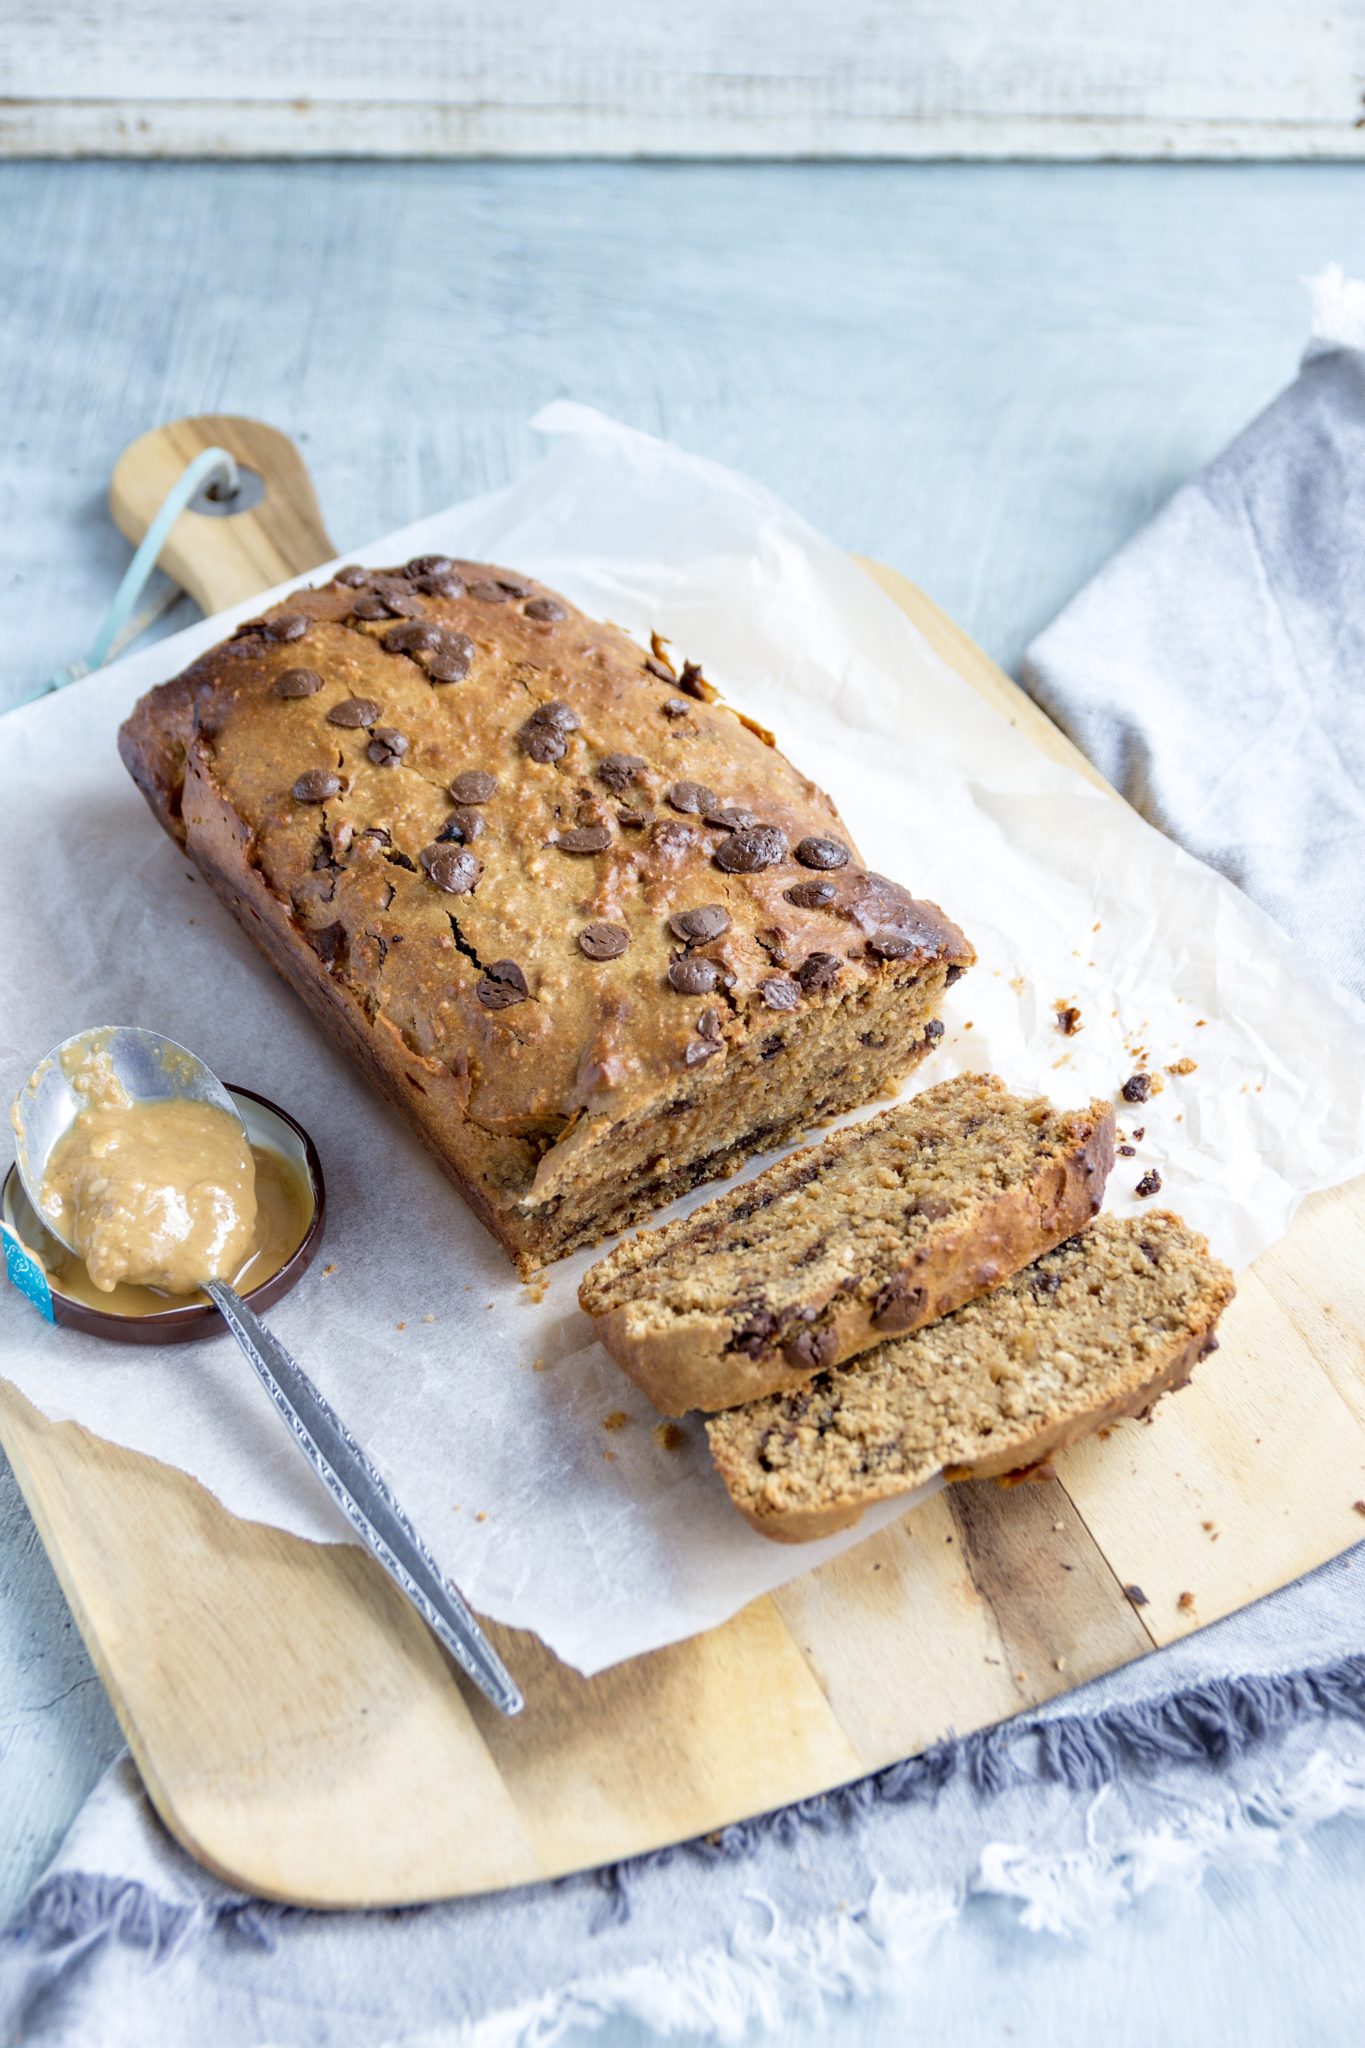 Vegan Peanut Butter and Chocolate Chips Bread